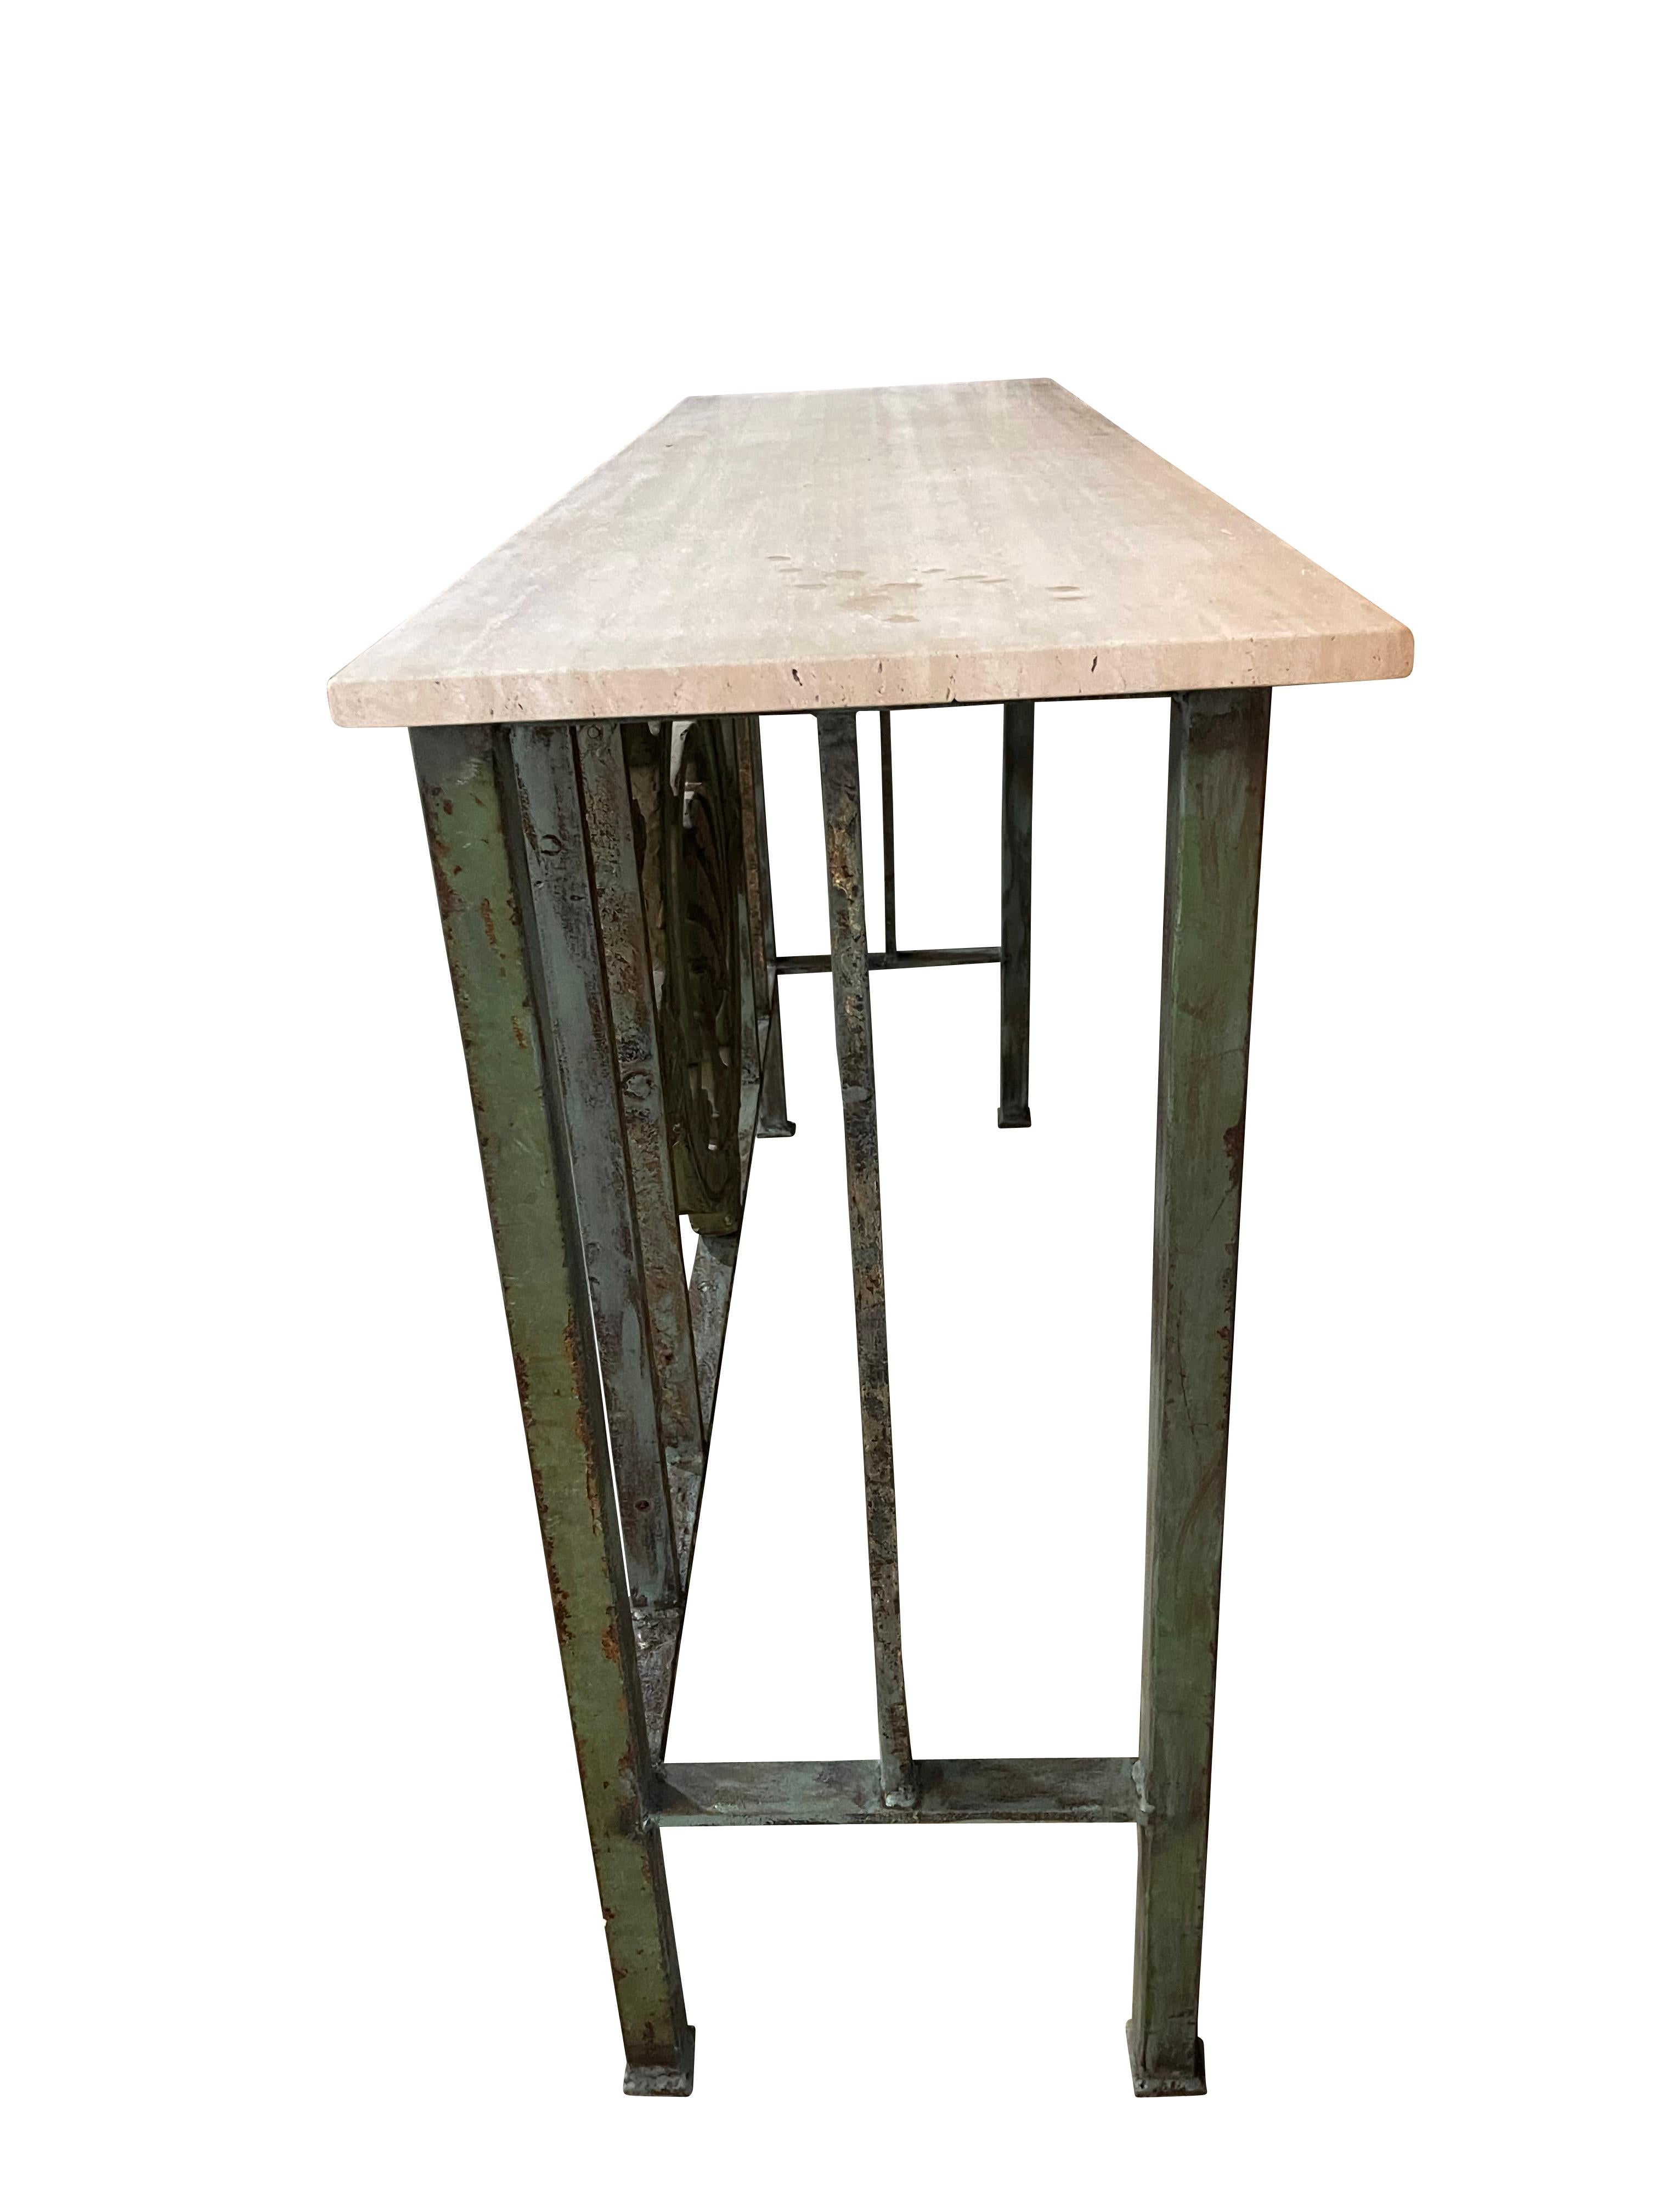 American Green Cast Iron Console  Table with Shell Motif  and Travertine Marble Top  For Sale